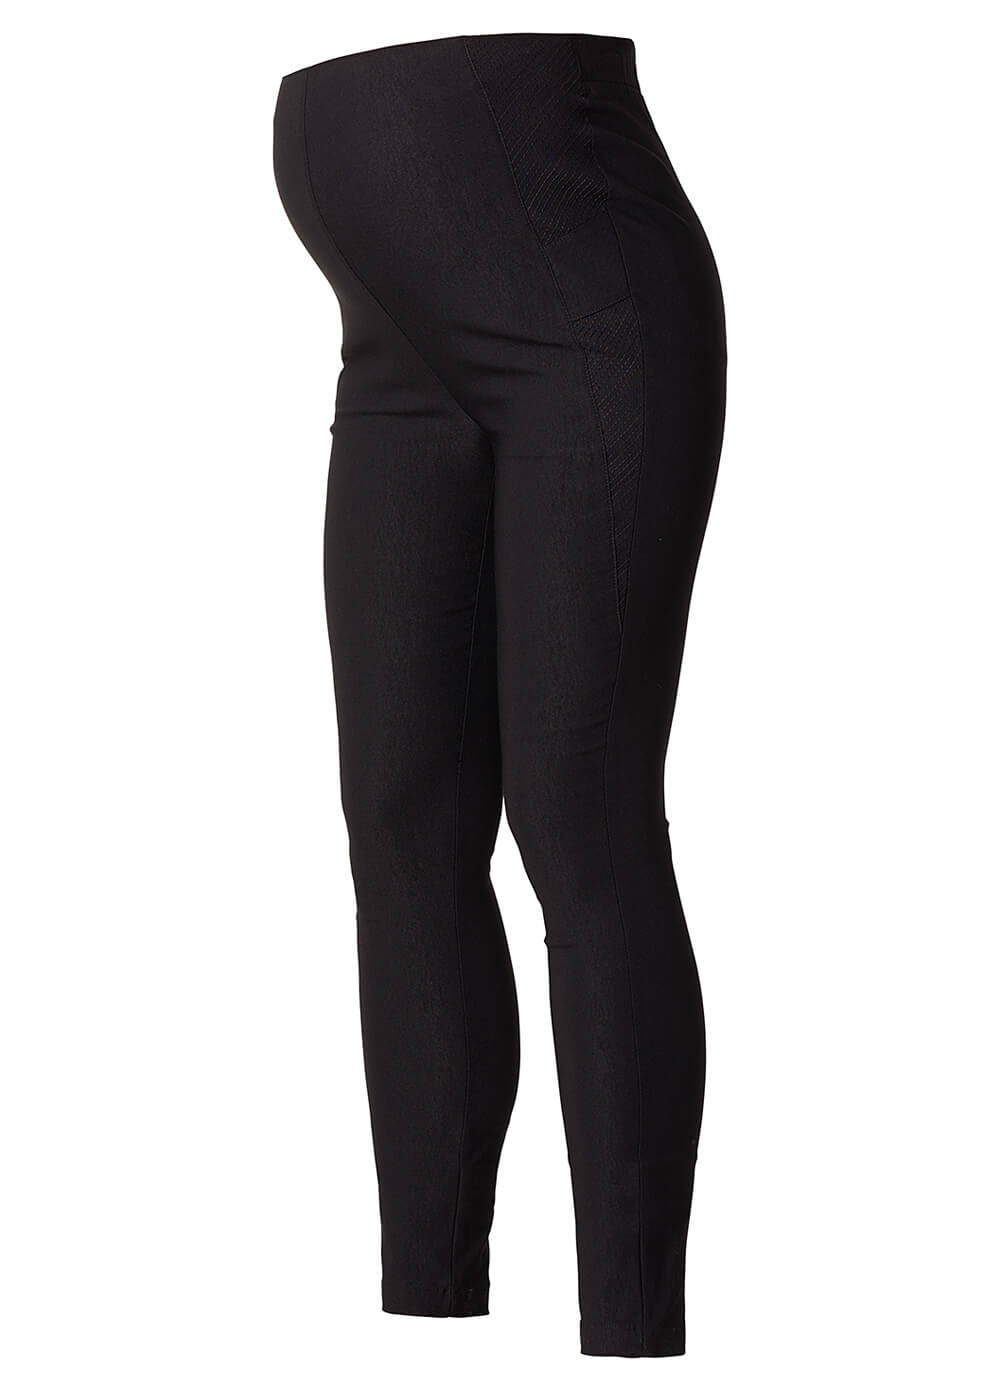 Stretch Skinny Black Maternity Trousers by Noppies